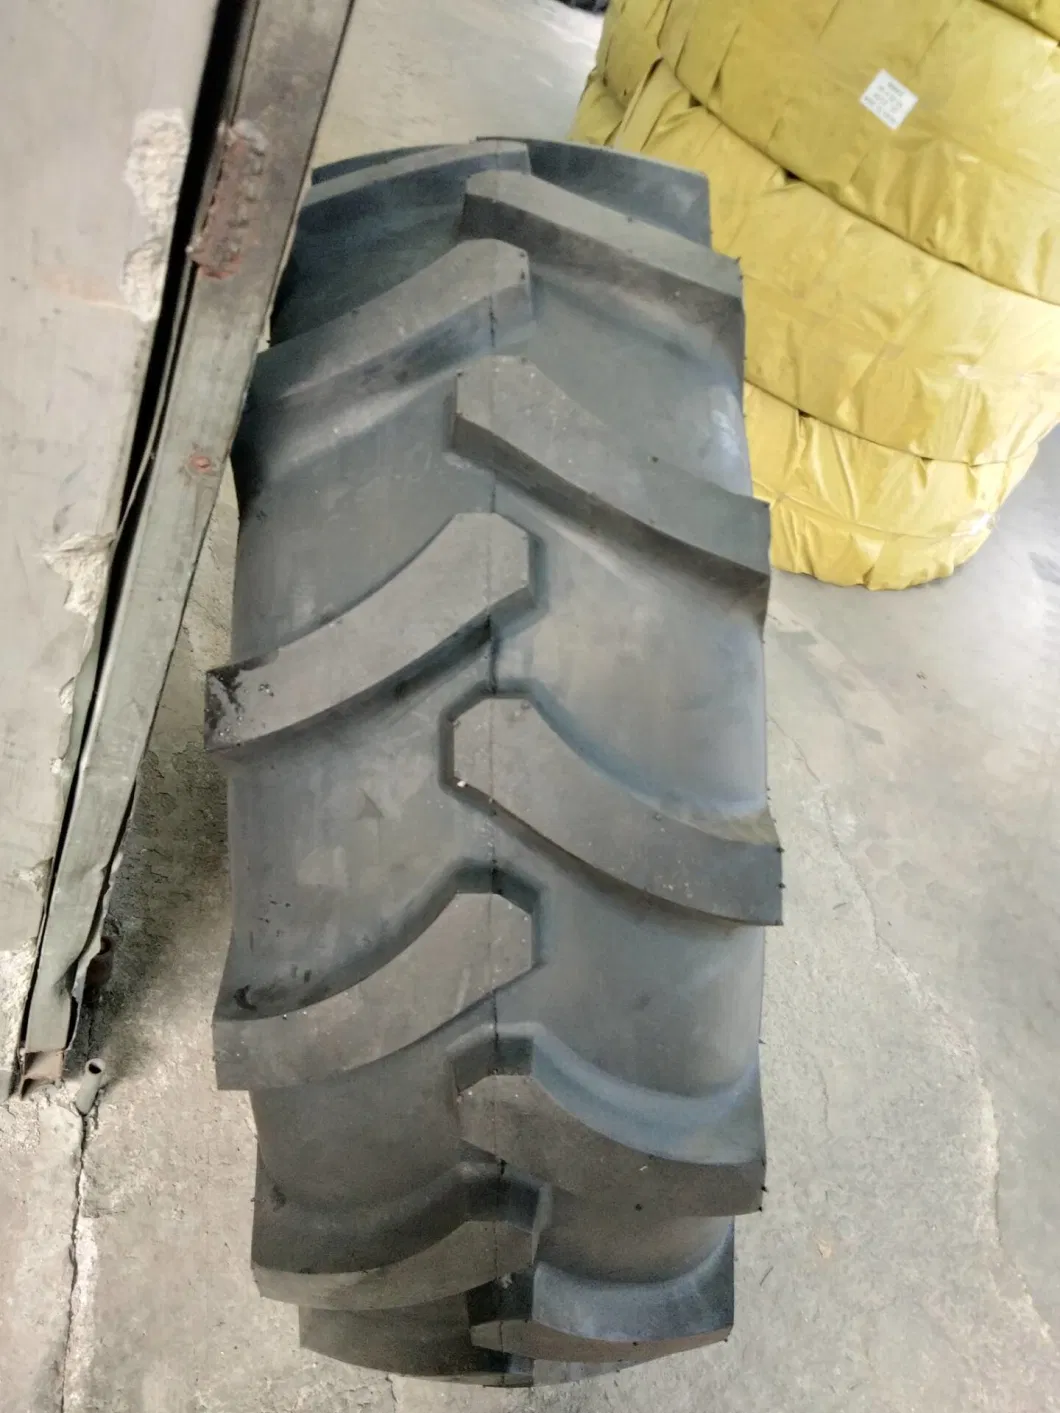 15.5/80-24 14.9-24 13.6- 24 14.9-30 Wholesale Cheap Price Chinese Nylon Bias Agriculture Tractor Farm Tires